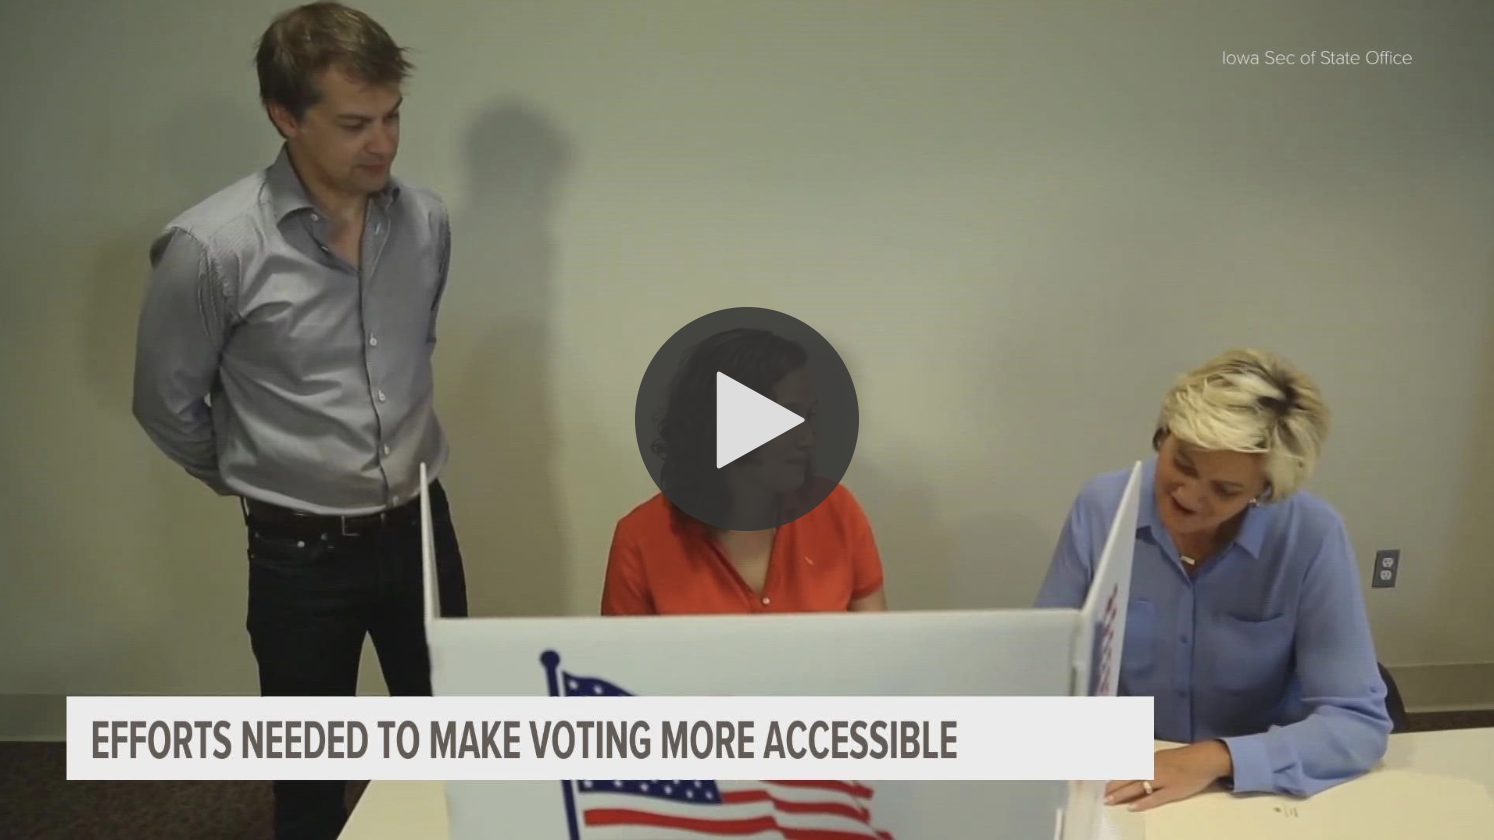 screenshot of video clip - voters around a table